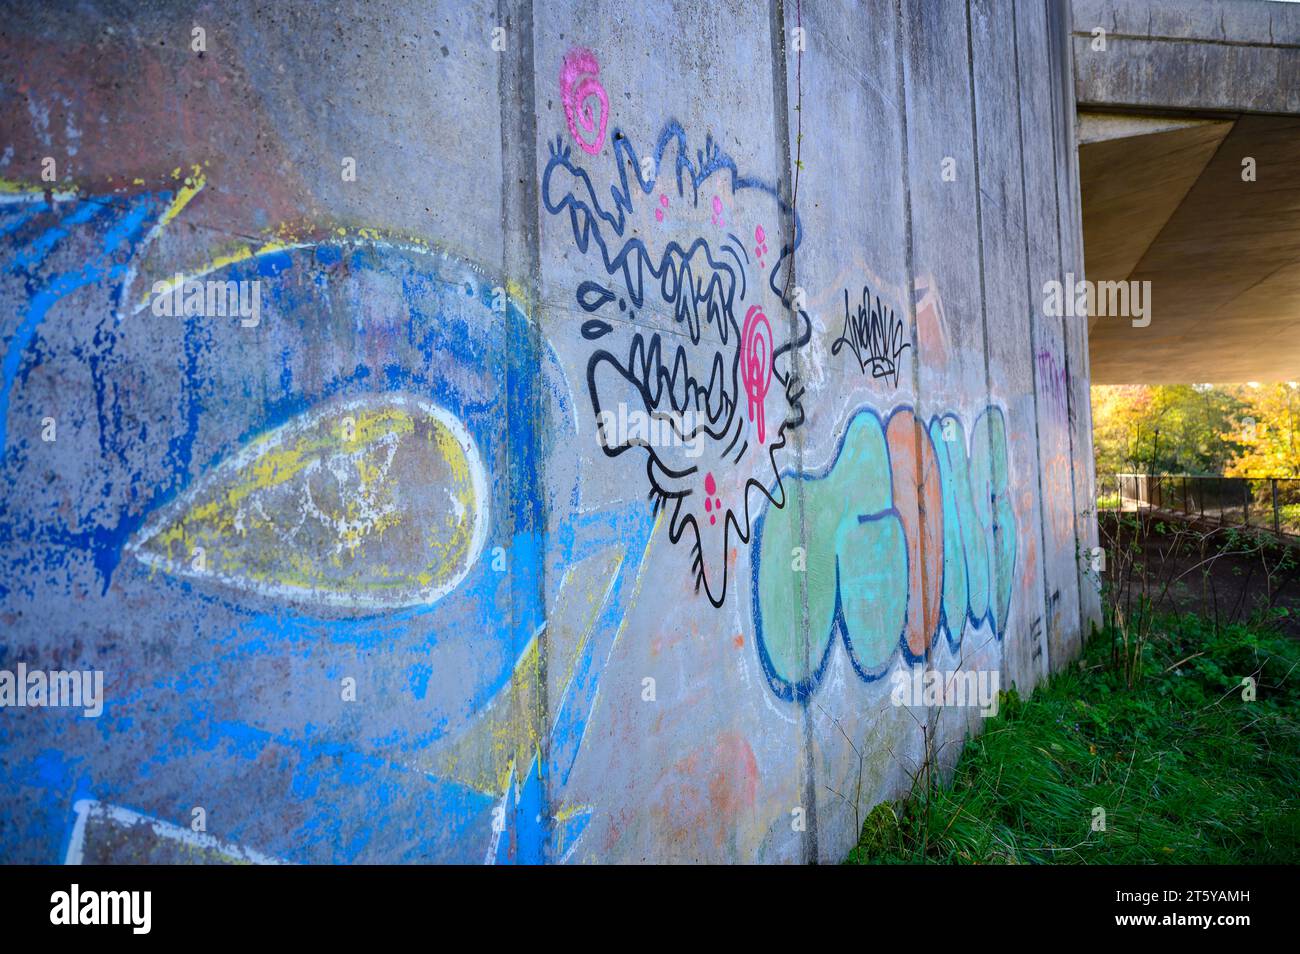 Graffiti spray painted on a concrete underpass. Stock Photo